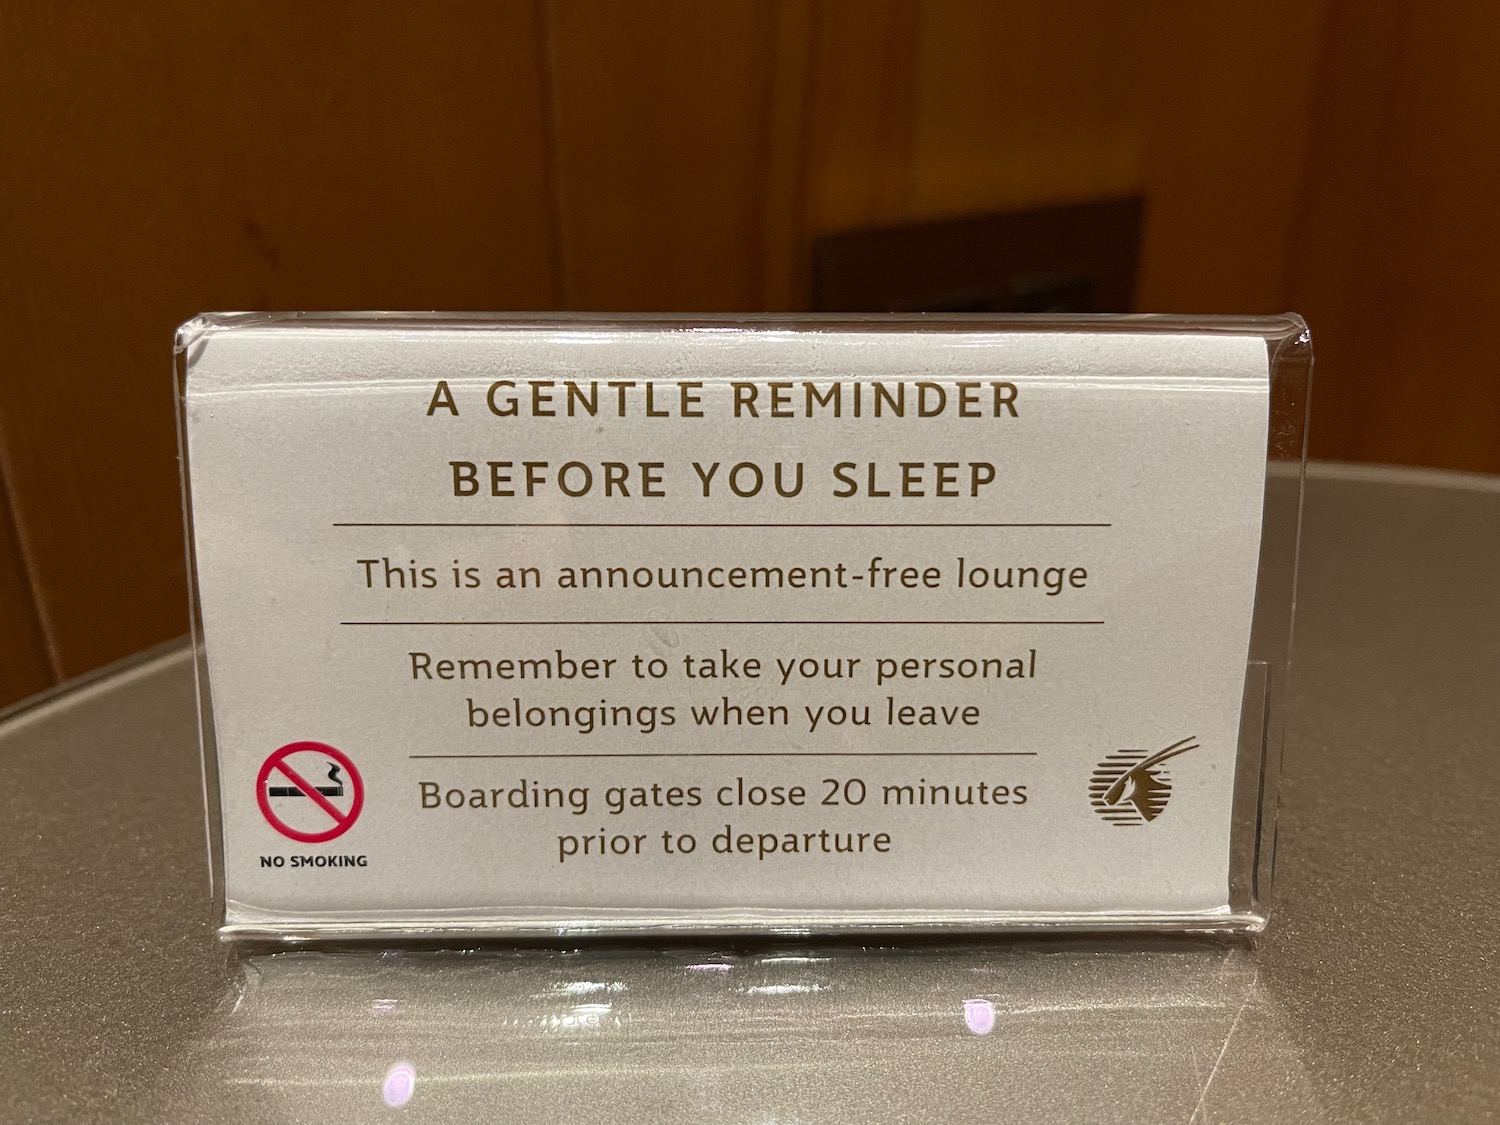 a sign on a counter